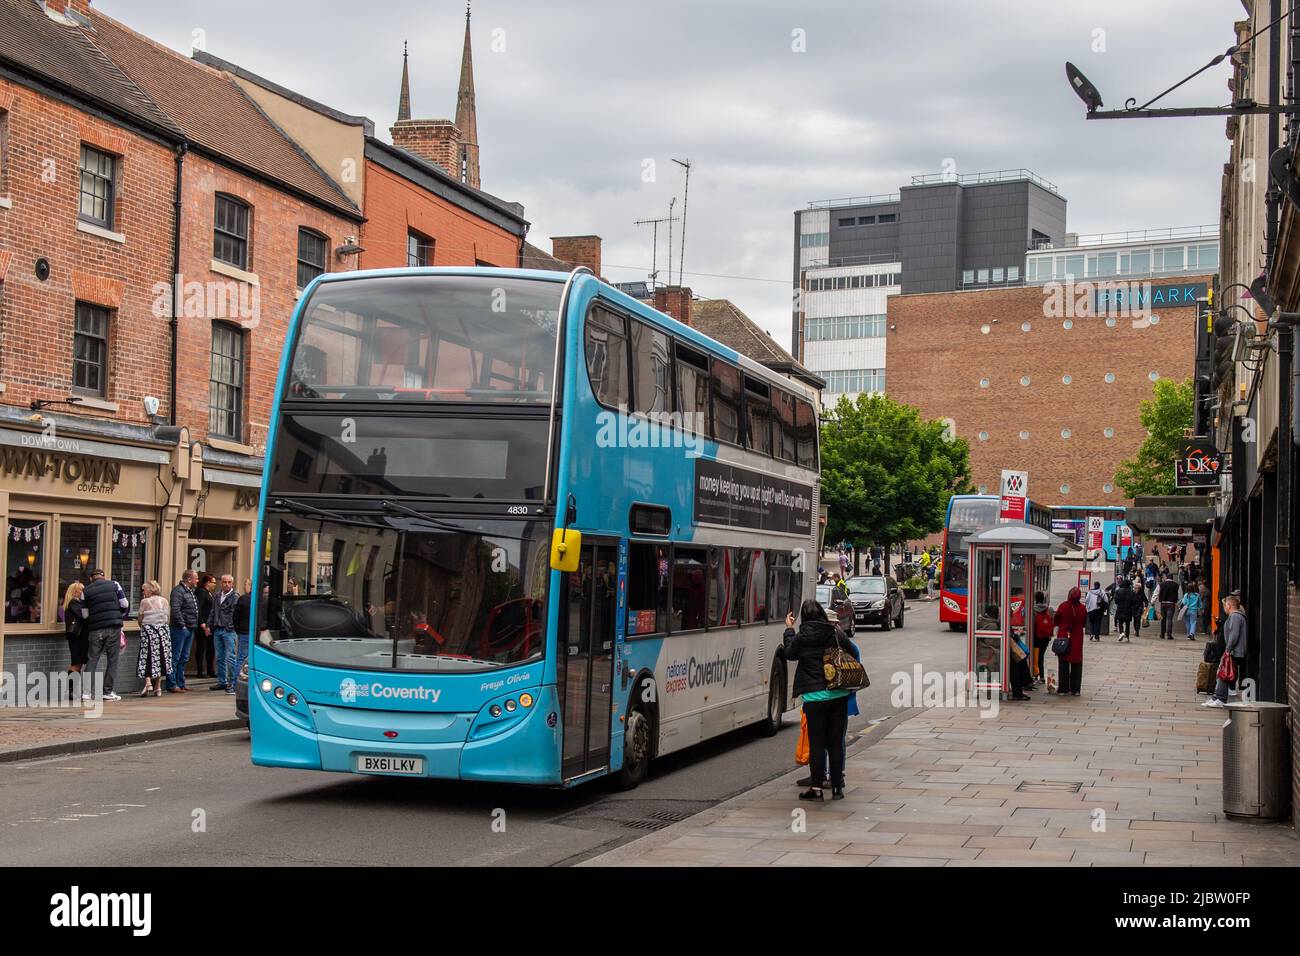 National Express Coventry Bus a Burgess, Coventry, West Midlands, Regno Unito. Foto Stock